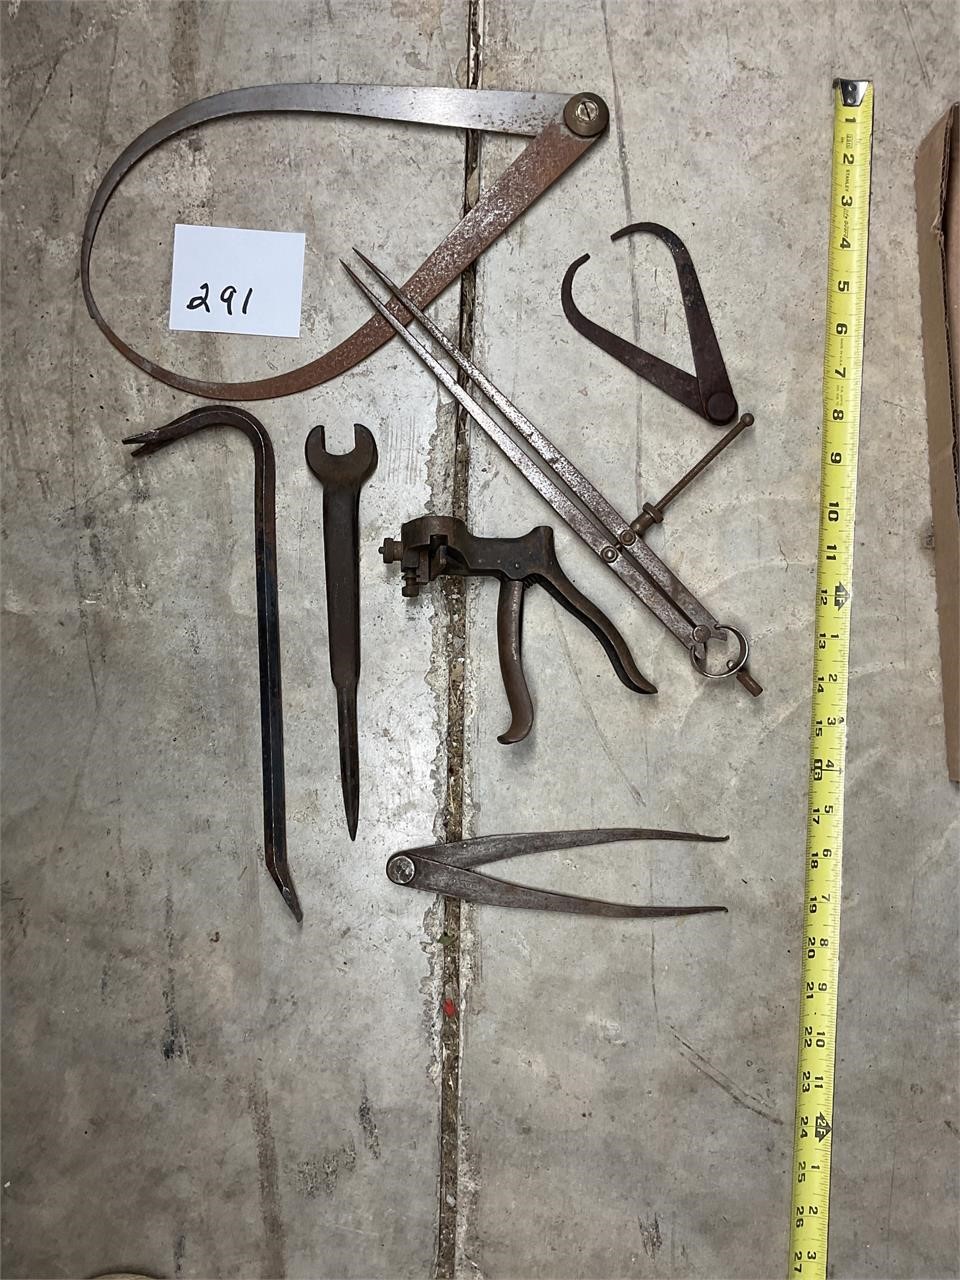 Old miscellaneous tools.